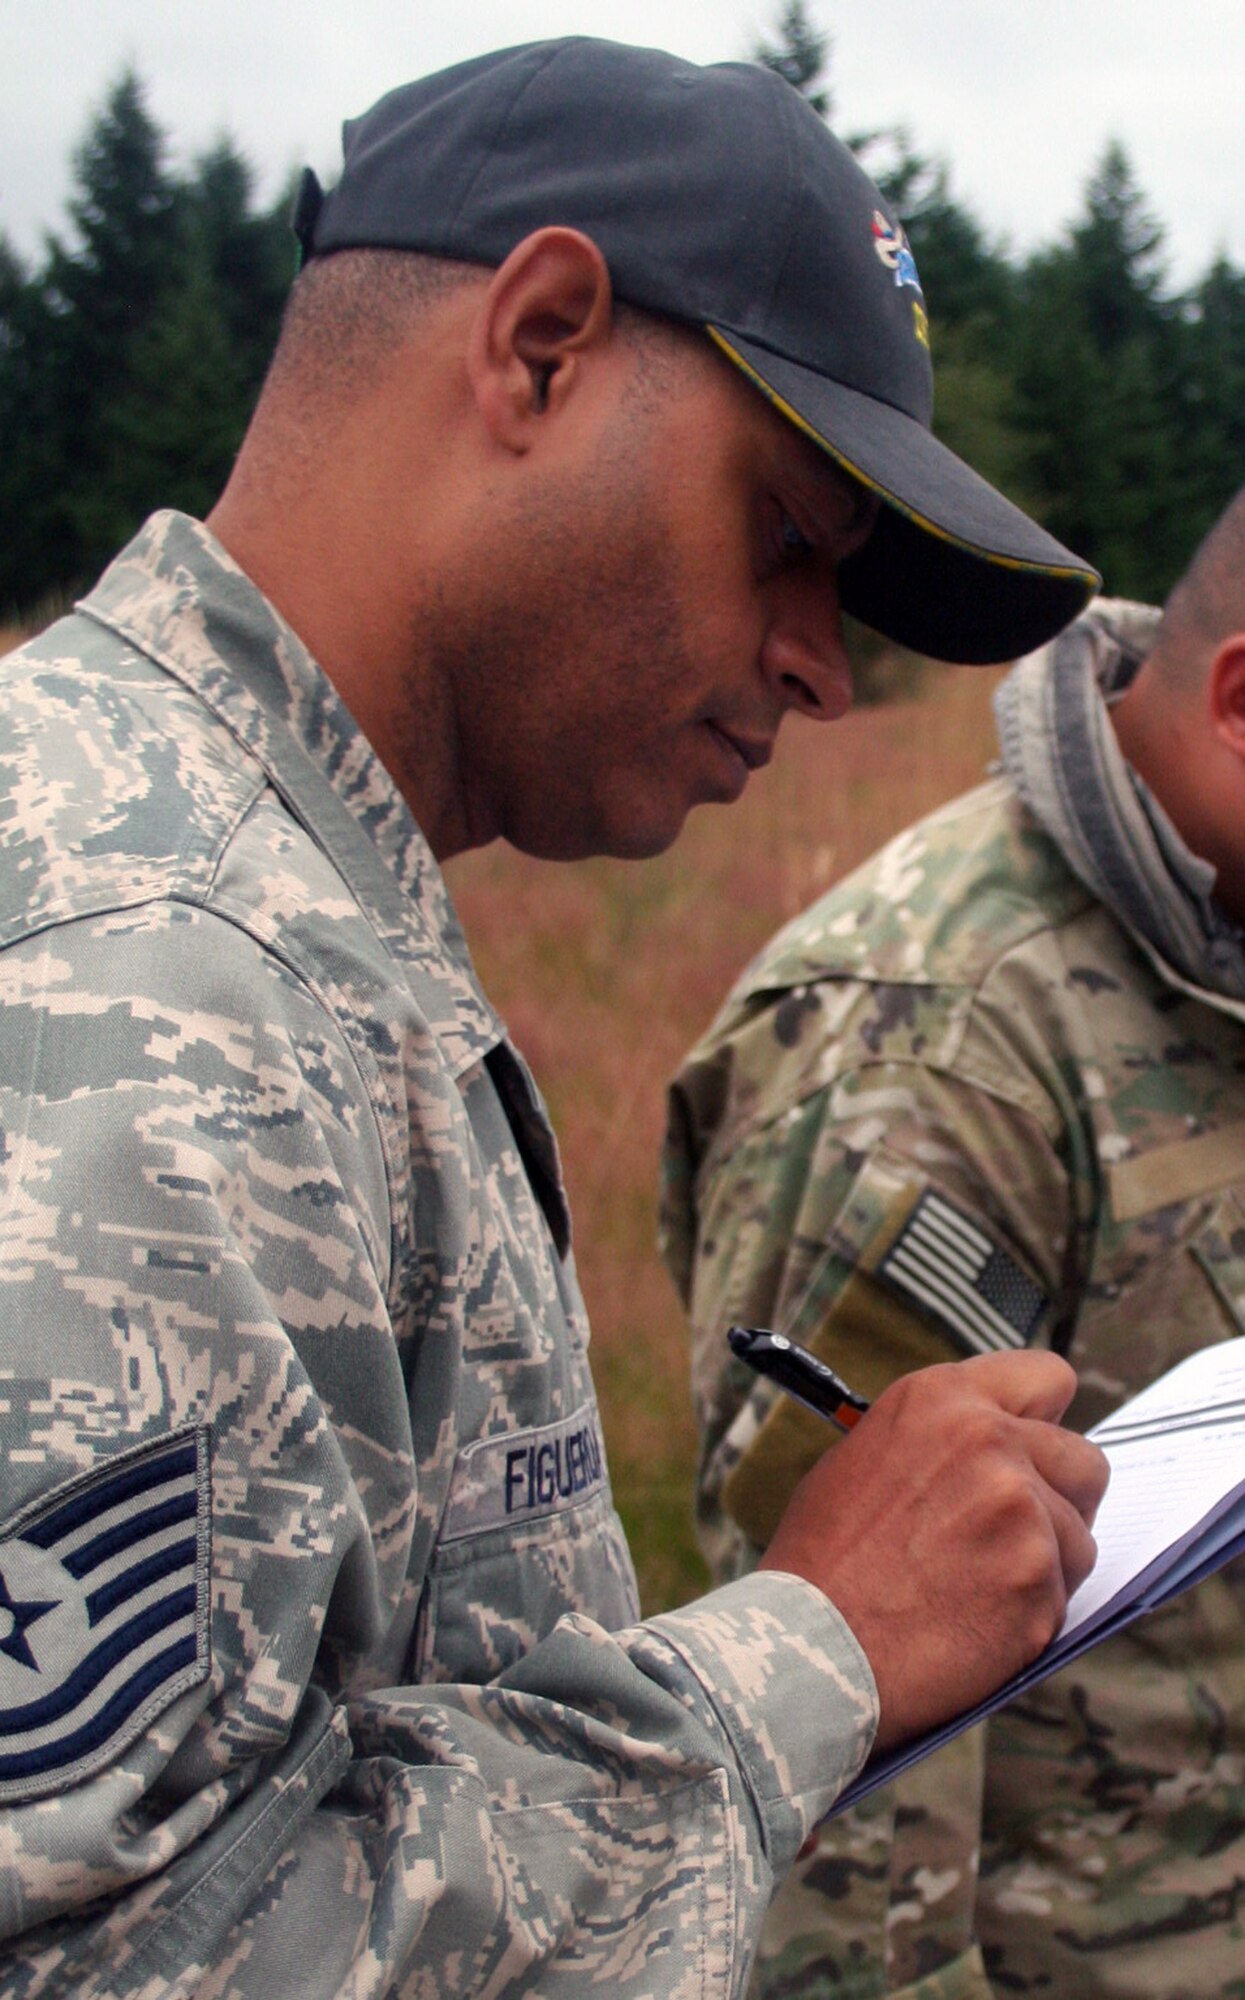 Tech. Sgt. Victor Figueroa, Air Mobility Rodeo 2011 umpire from the 421st Combat Training Squadron at the U.S. Air Force Expeditionary Center on Joint Base McGuire-Dix-Lakehurst, N.J., reviews checklists for the Rodeo security forces combat tactics event at Joint Base Lewis-McChord, Wash., on July 25, 2011. (U.S. Air Force Photo/Master Sgt. Scott T. Sturkol)